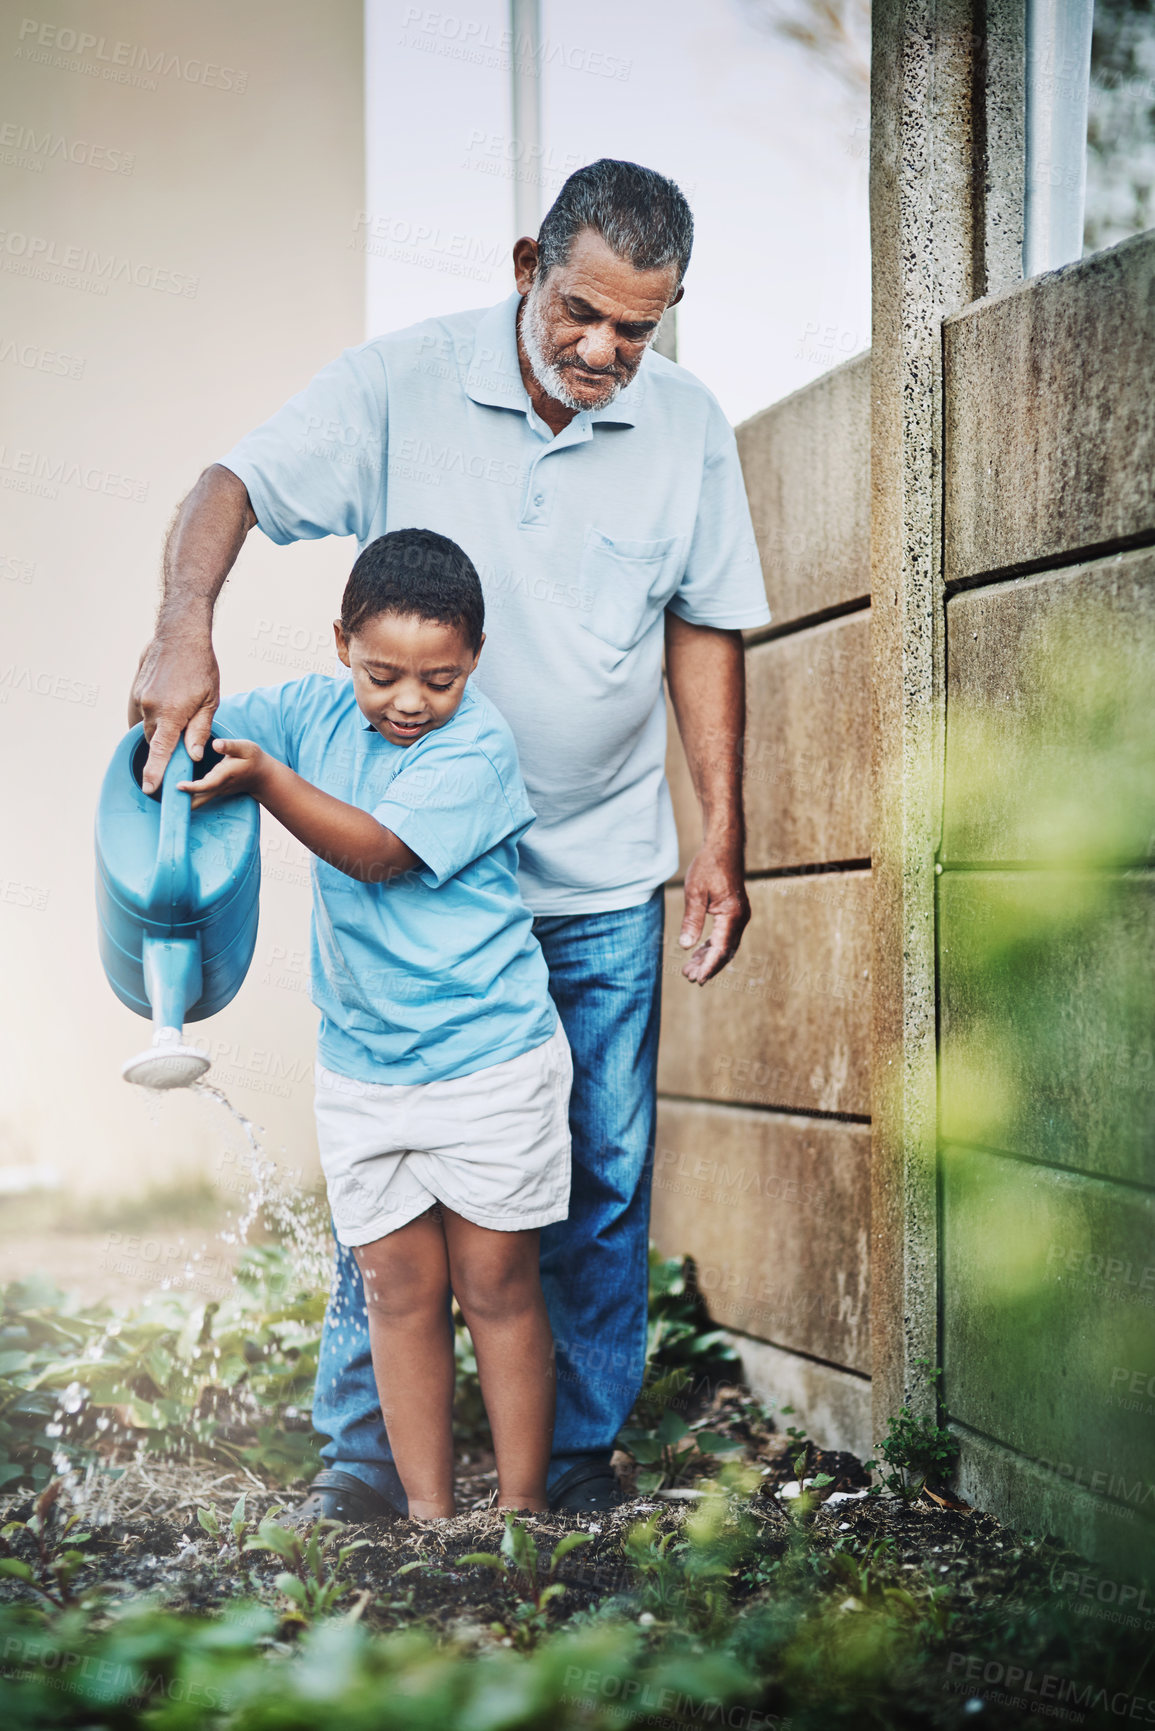 Buy stock photo Shot of a little boy and his grandfather using watering the garden together outdoors